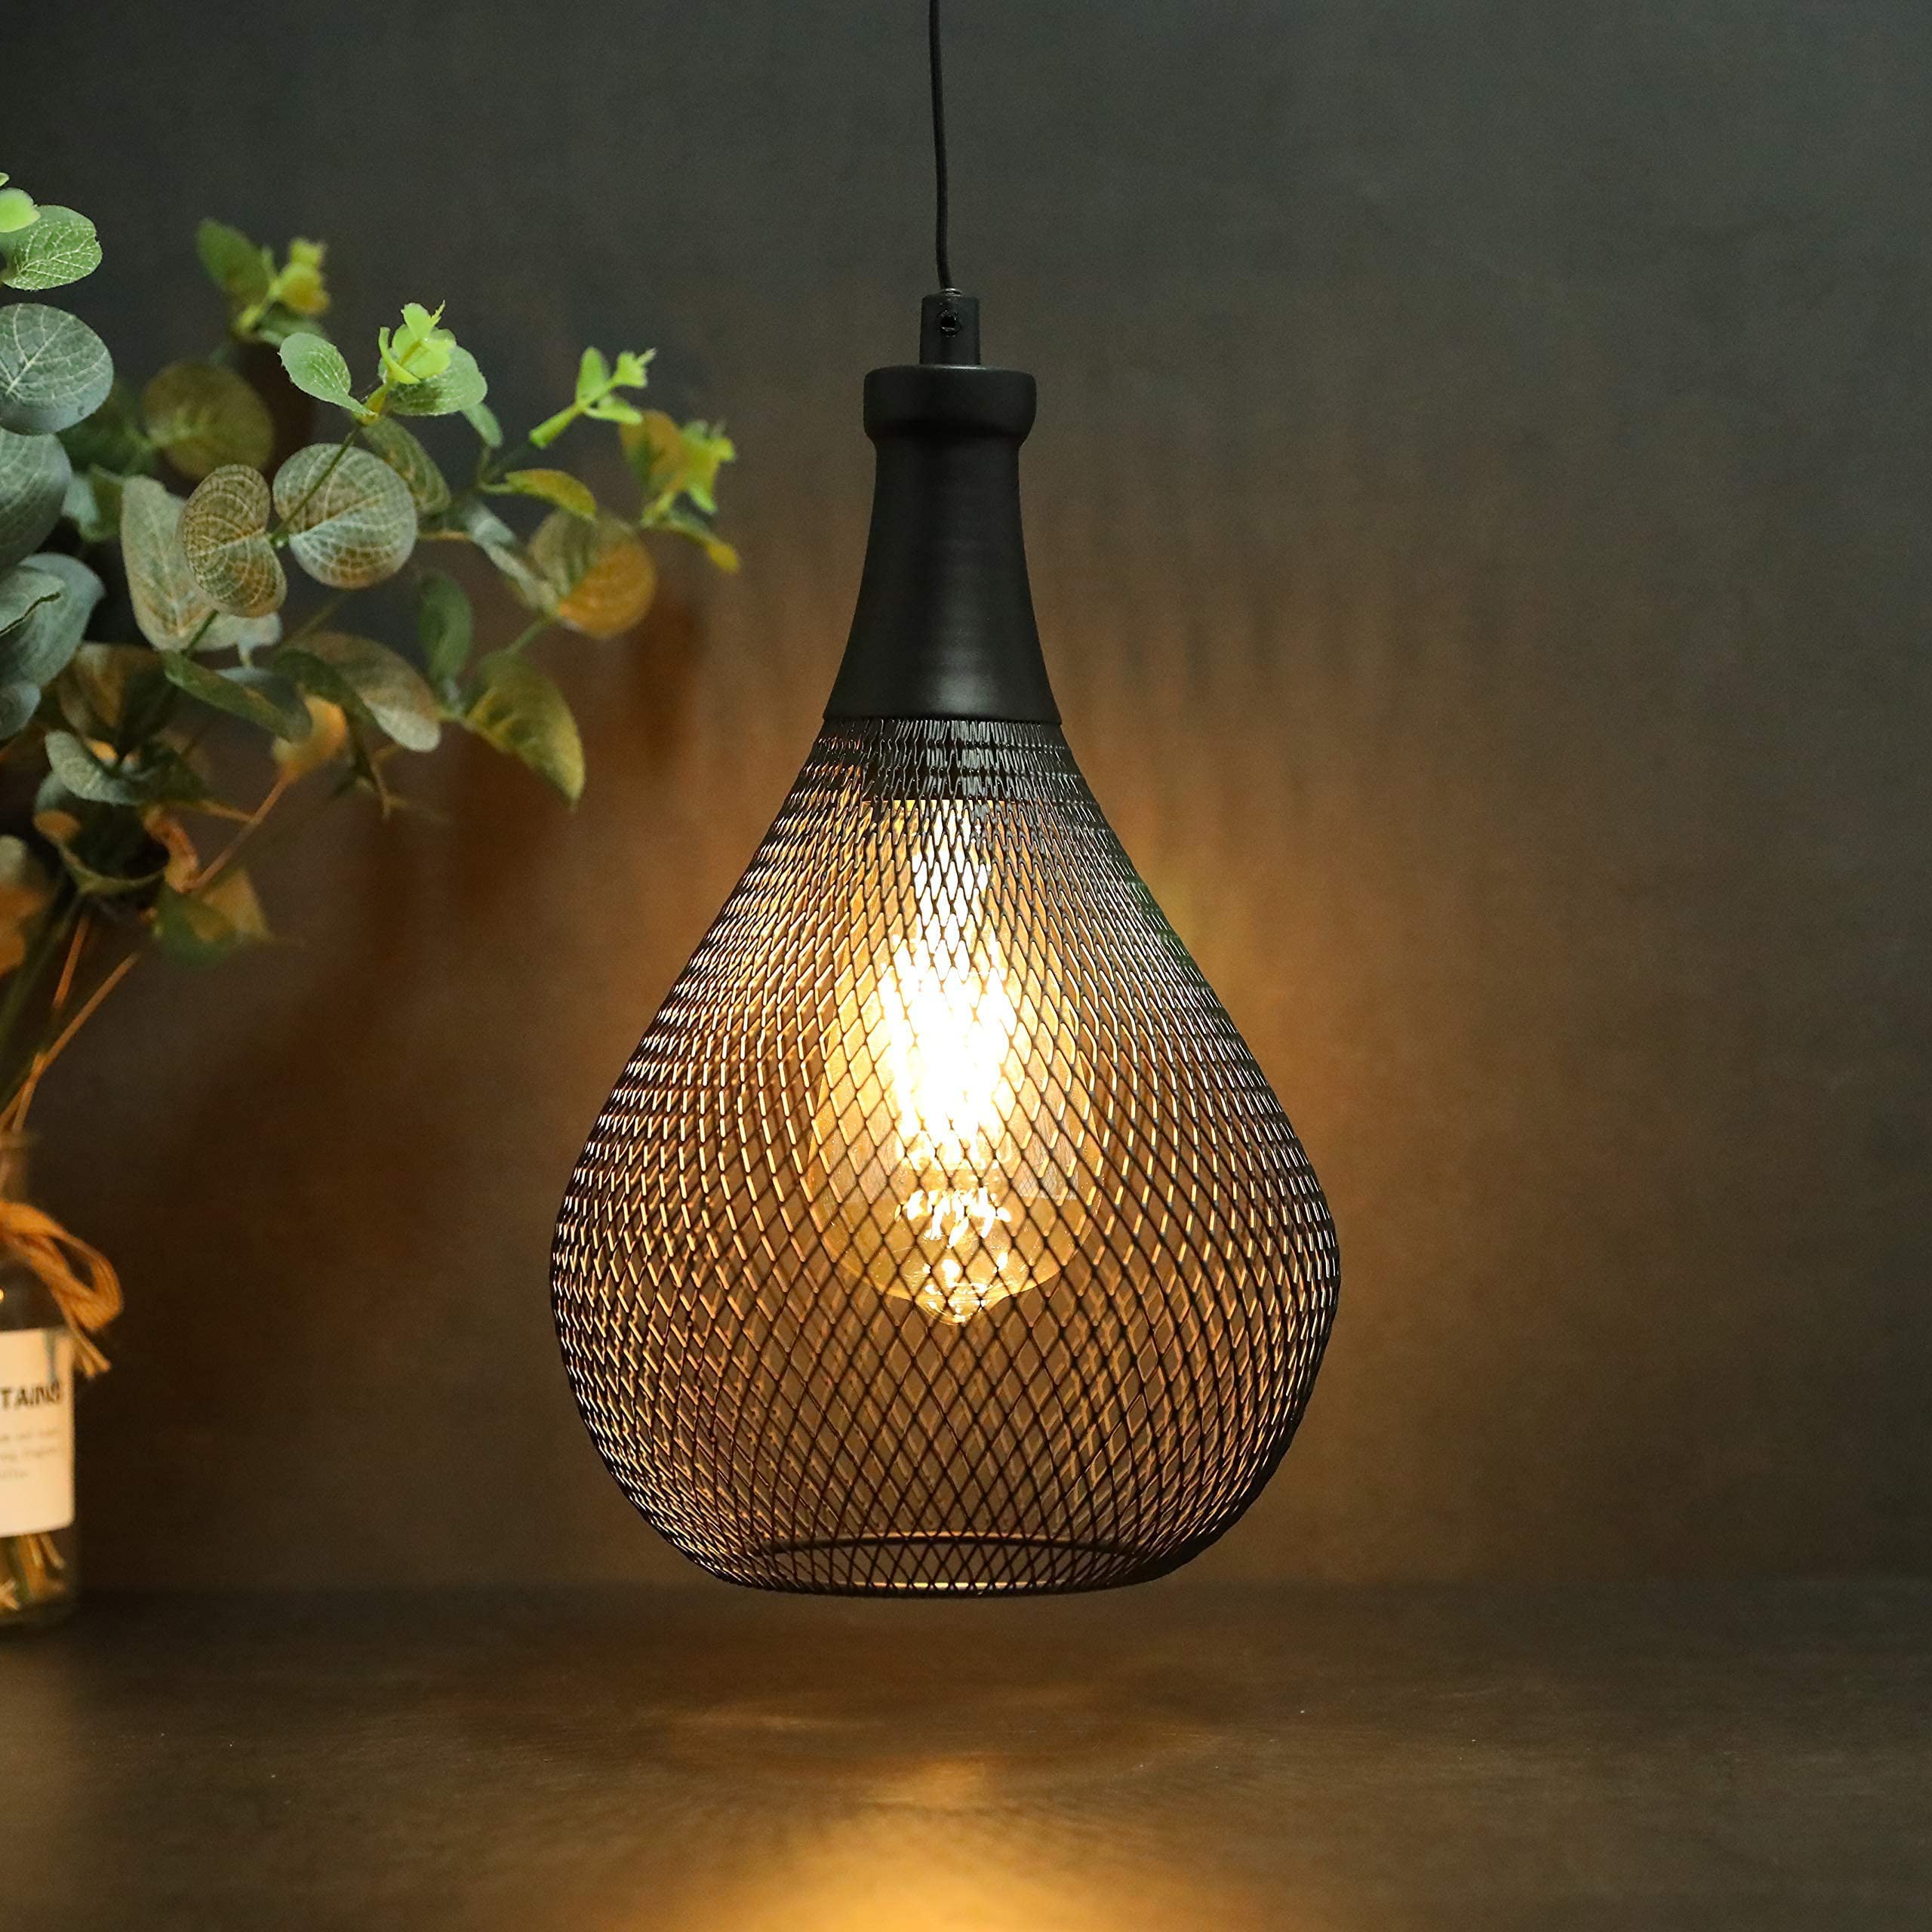 JHY DESIGN Hanging Lamp Battery Powered with 6-Hour Timer, Decorative Pendant Lamp 28cm High Cage Battery Lamp for Garden Bar Party Indoor Balcony Living Room Shop Gifts Hallway Bedside Entryway Xmas